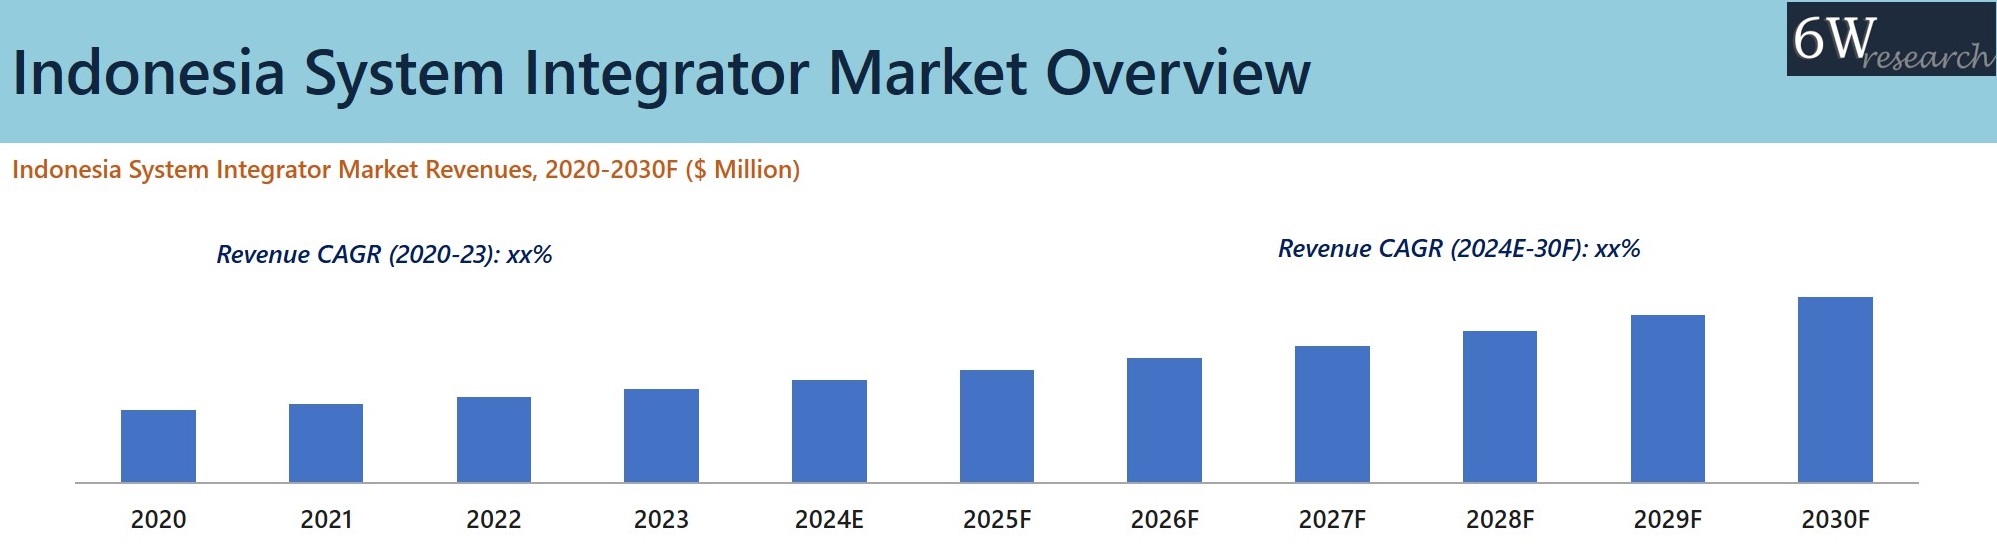 Indonesia System Integrator Market Overview